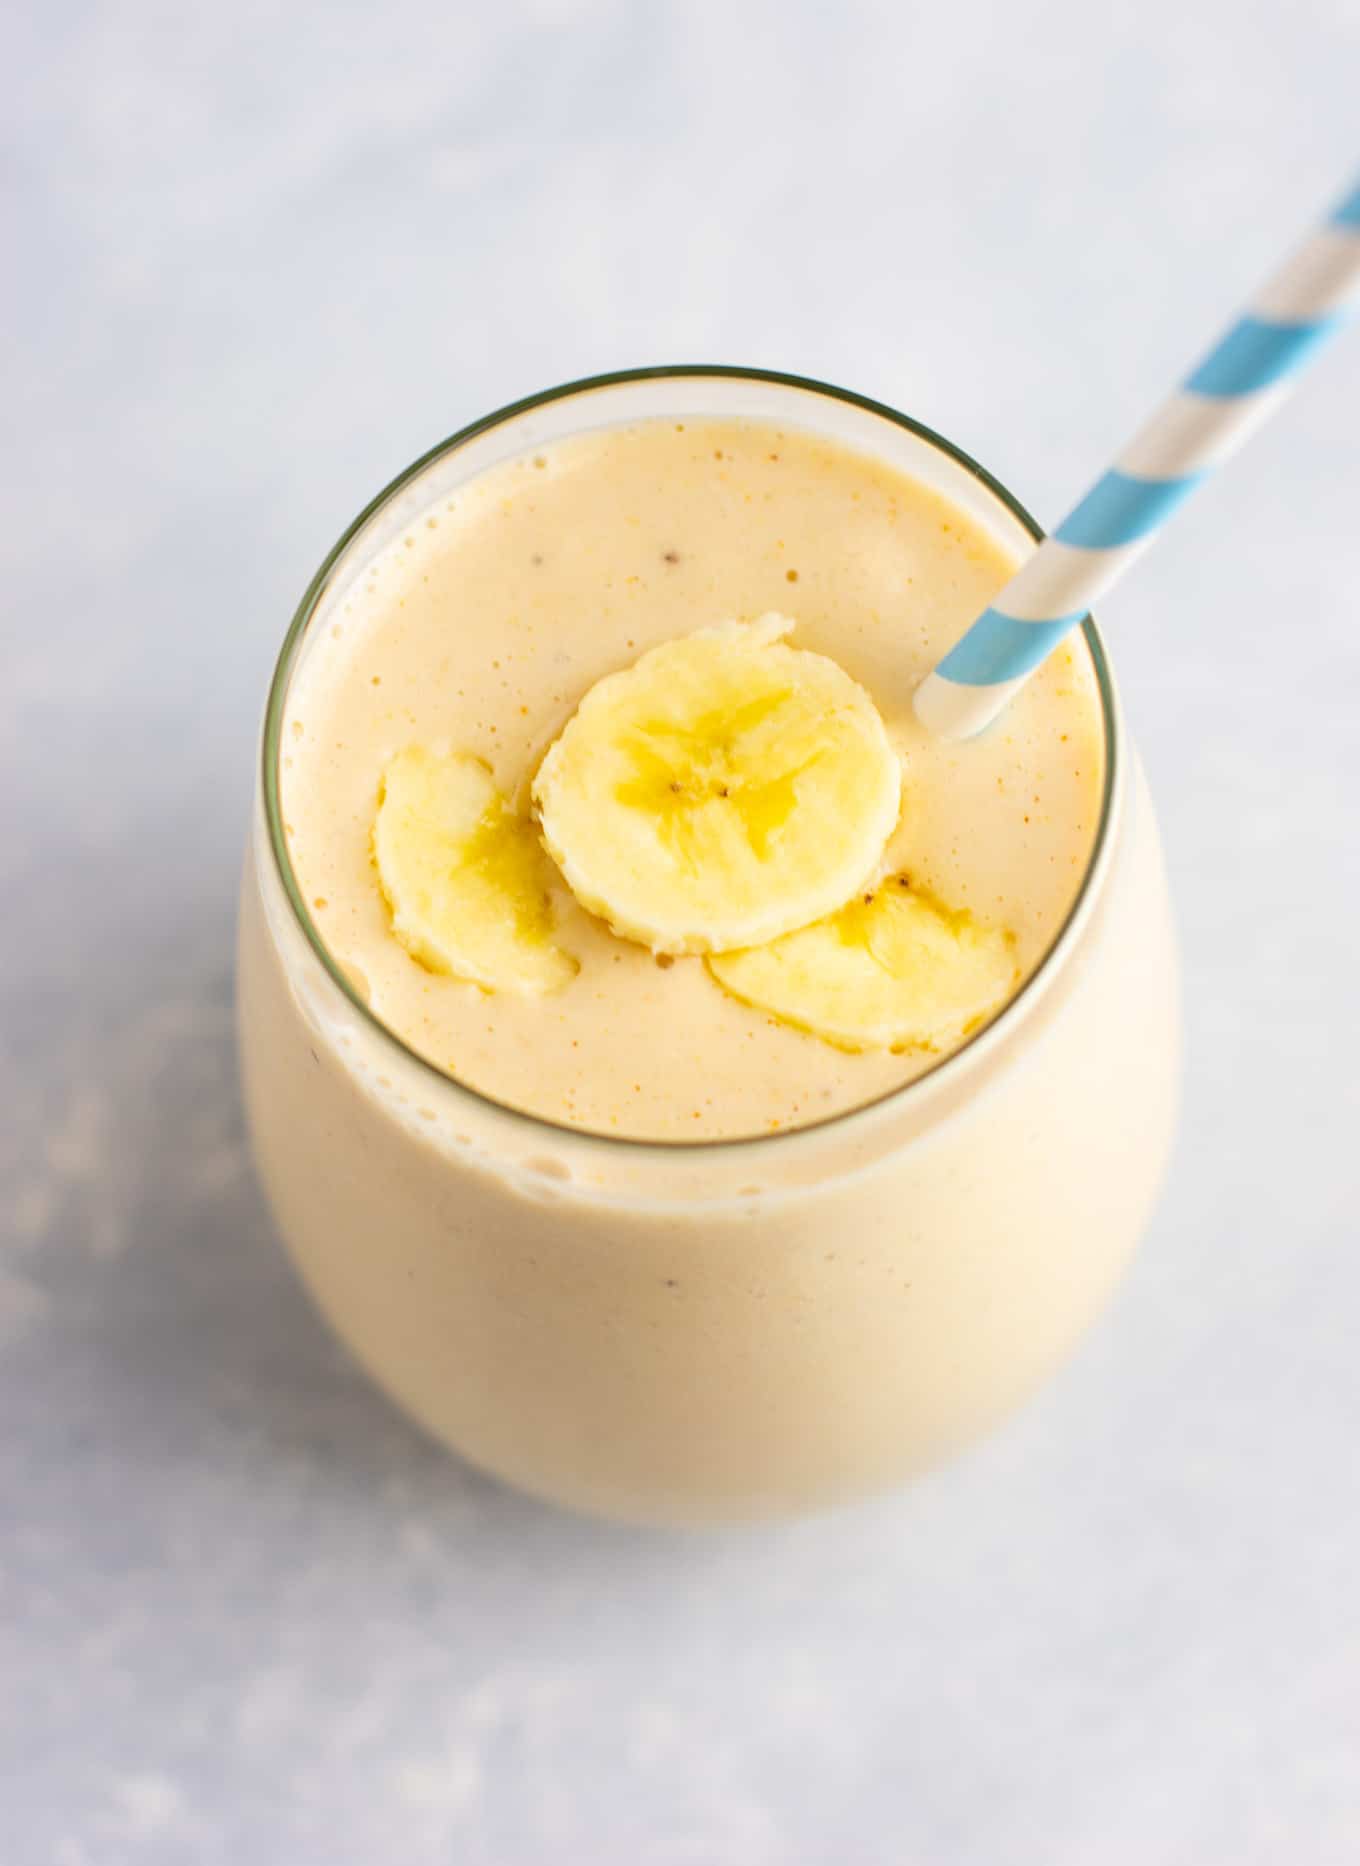 peanut butter banana smoothie topped with sliced banana